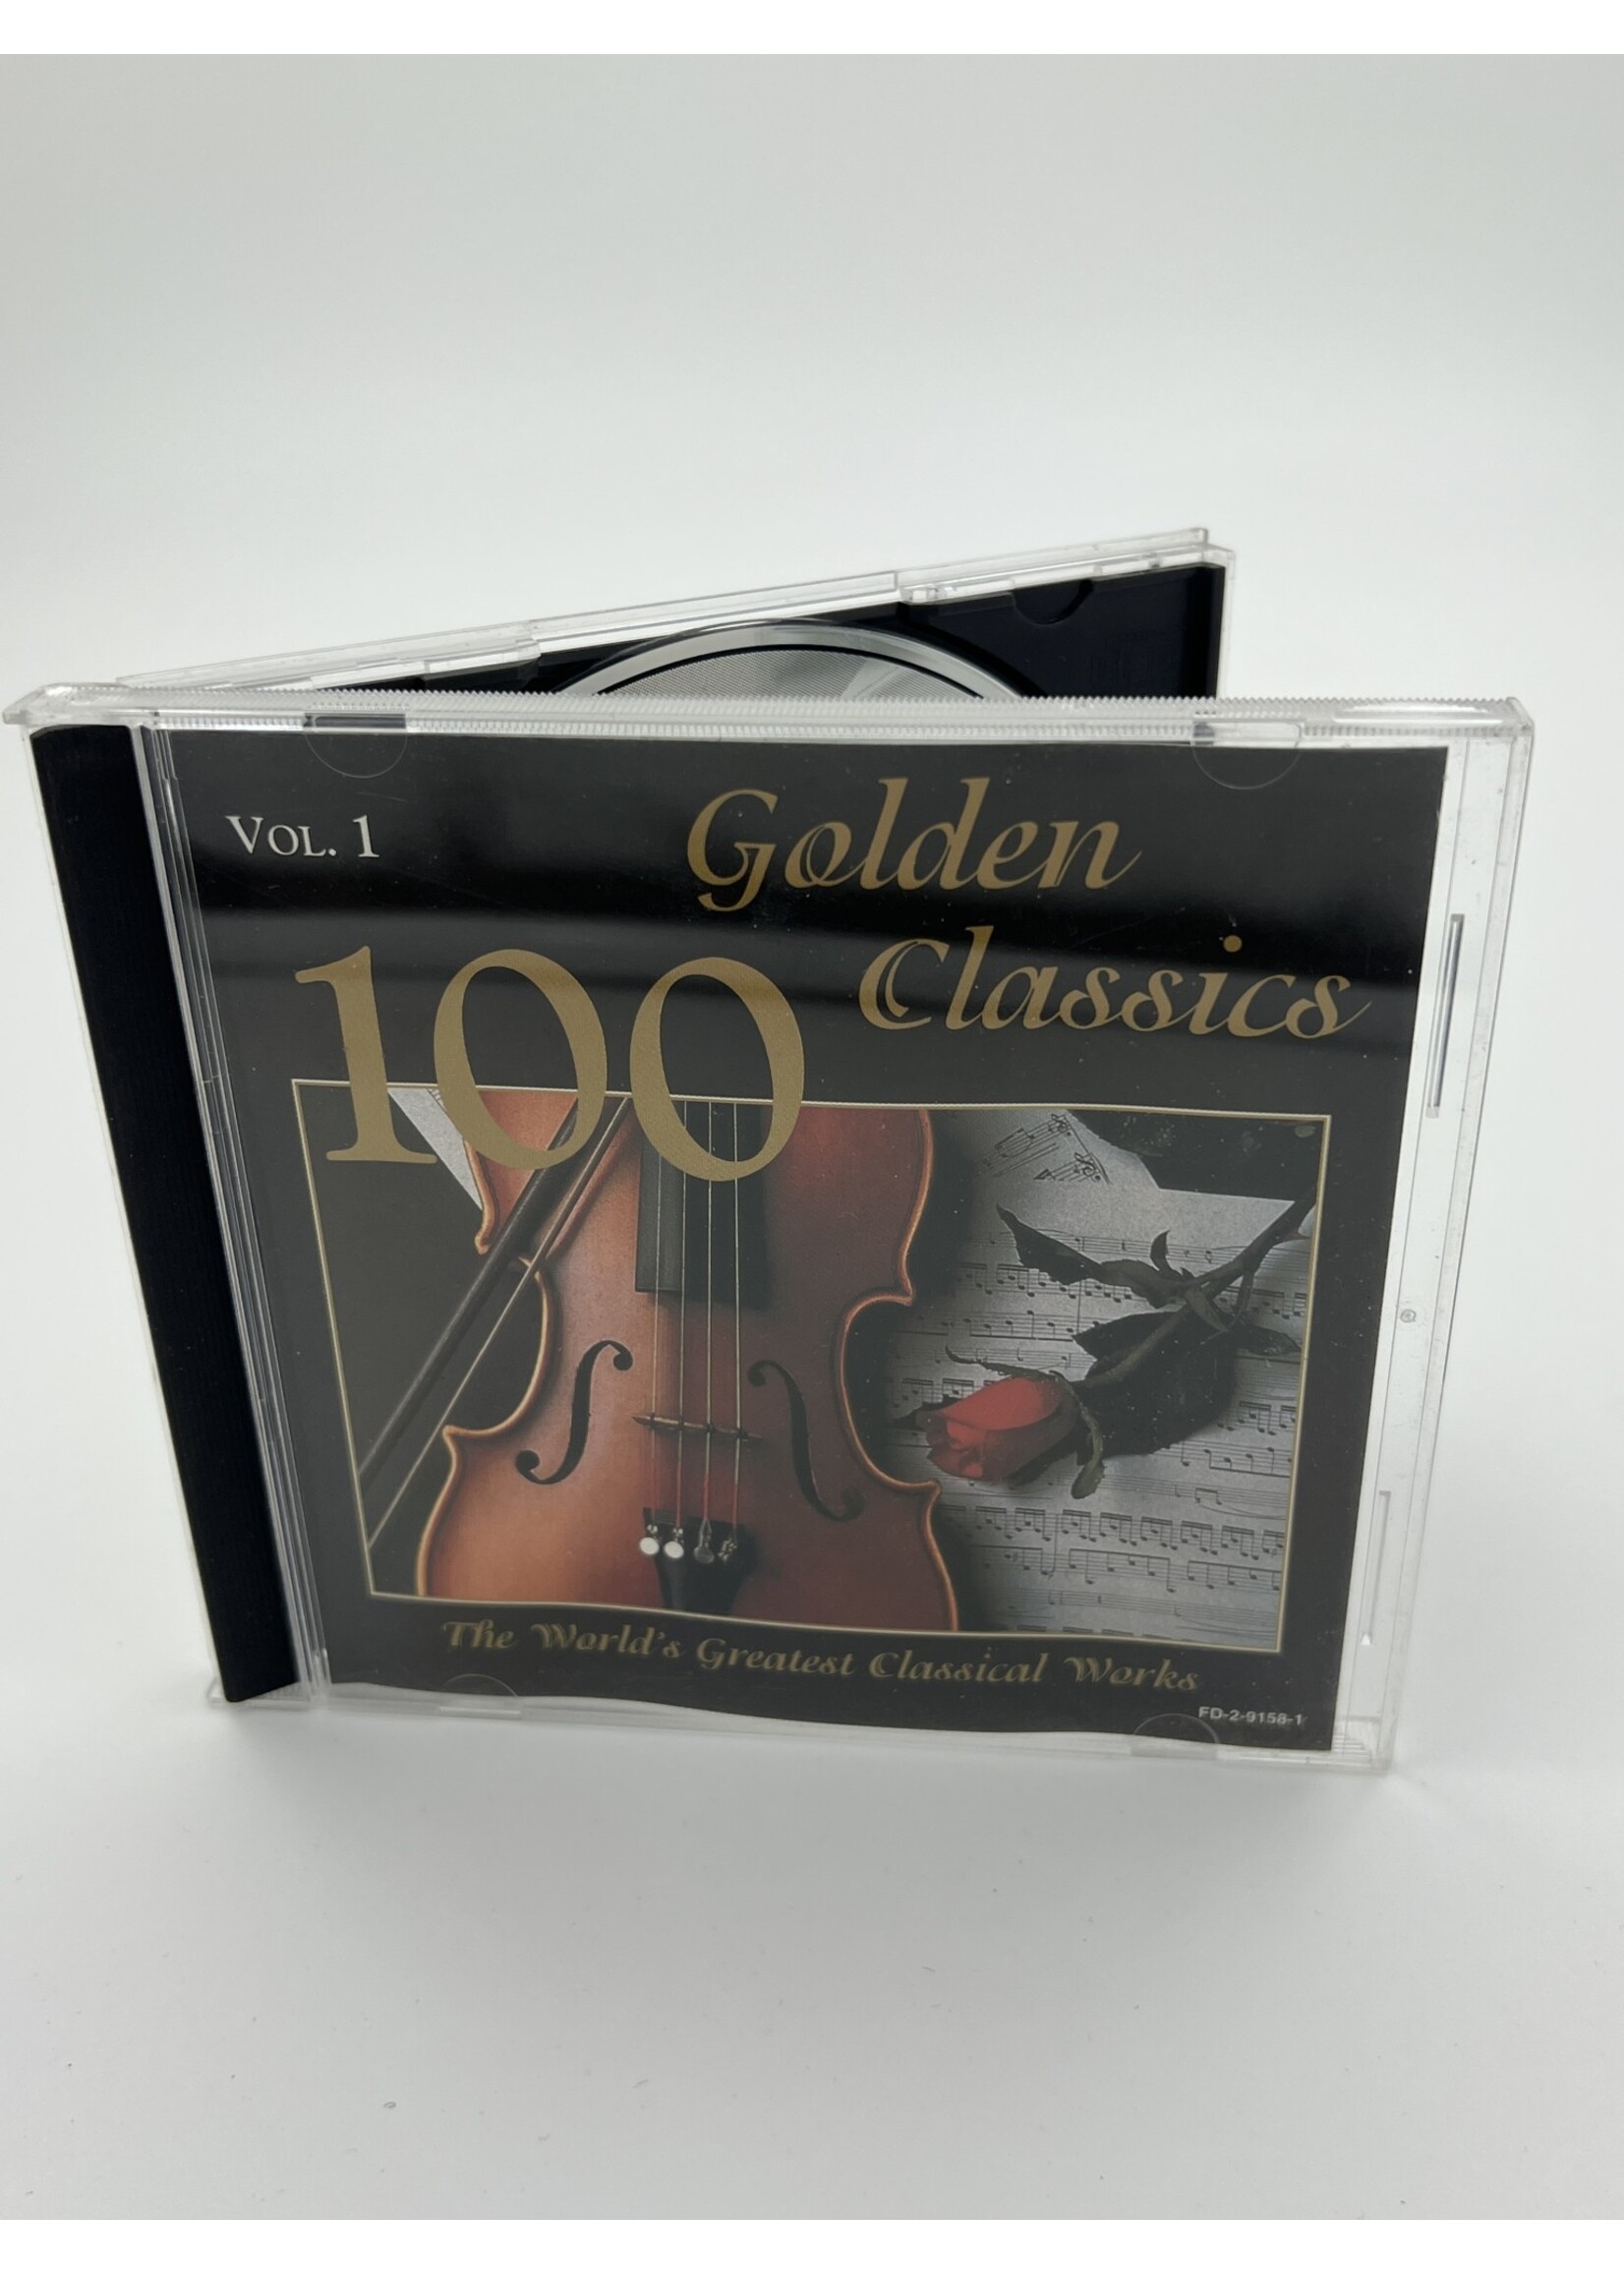 CD 100 Golden Classics Volume 1 The Worlds Greatest Classical Works CD